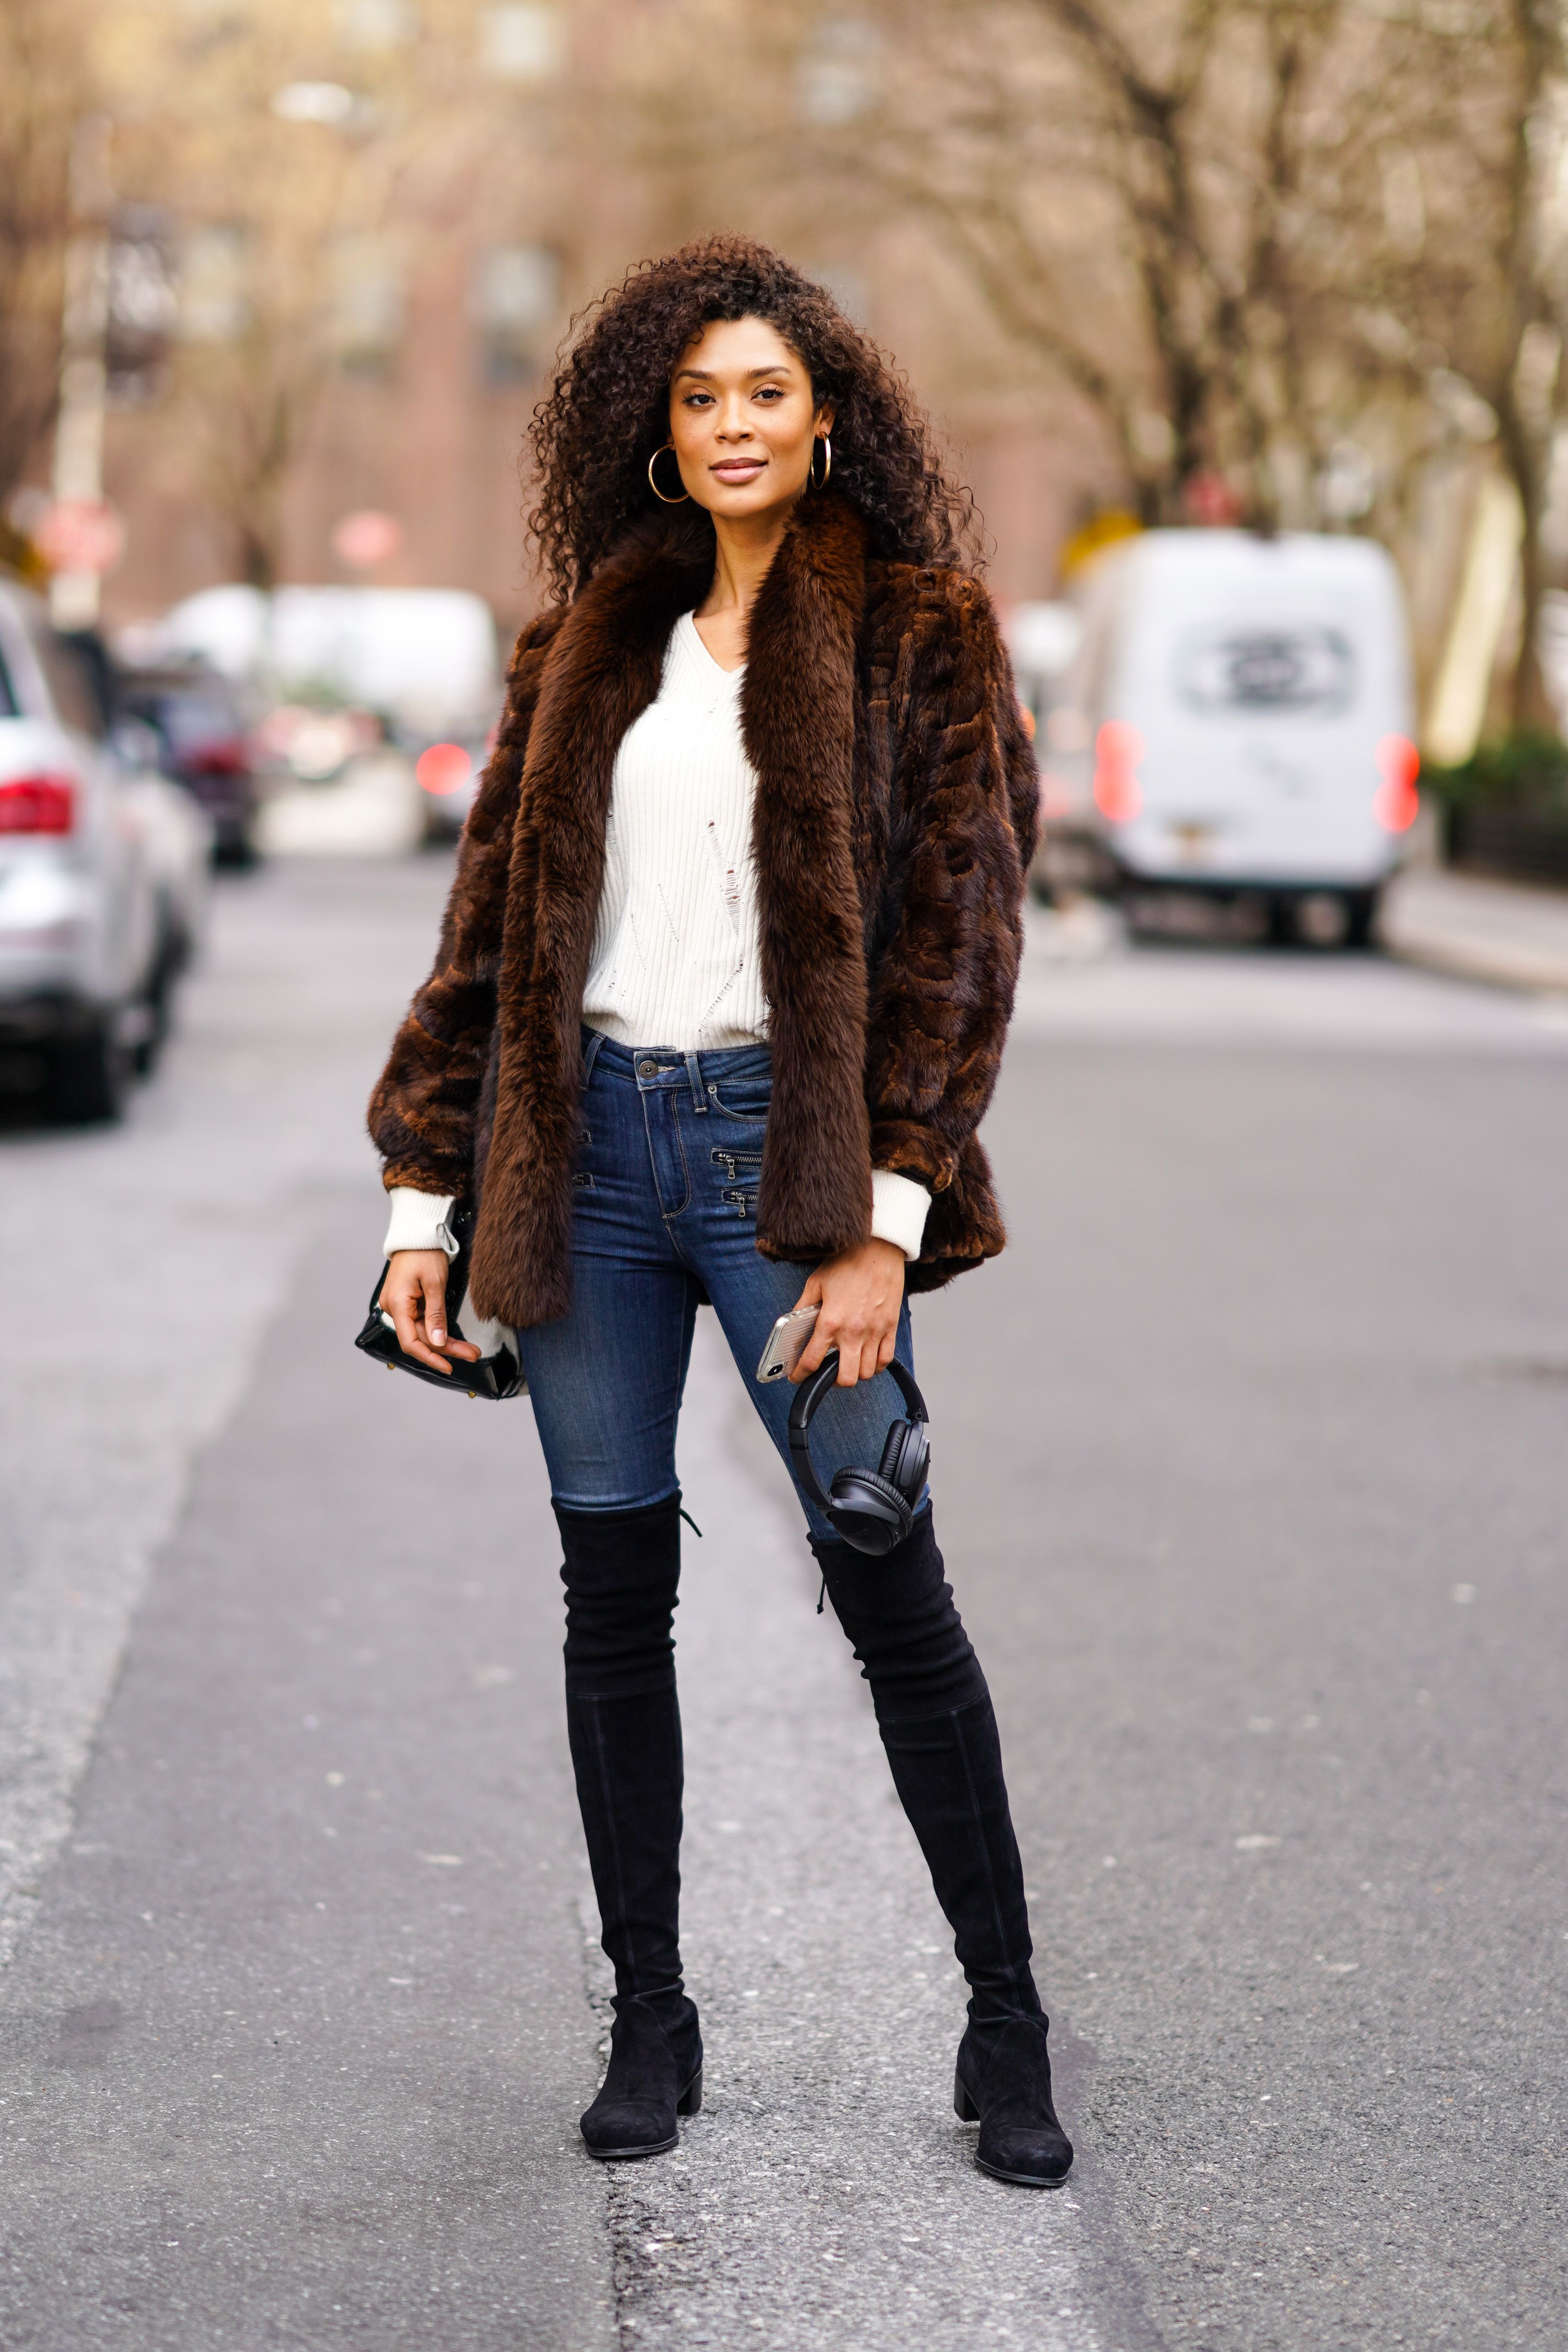 Thigh-High Boots Outfit Ideas for Fall 2020